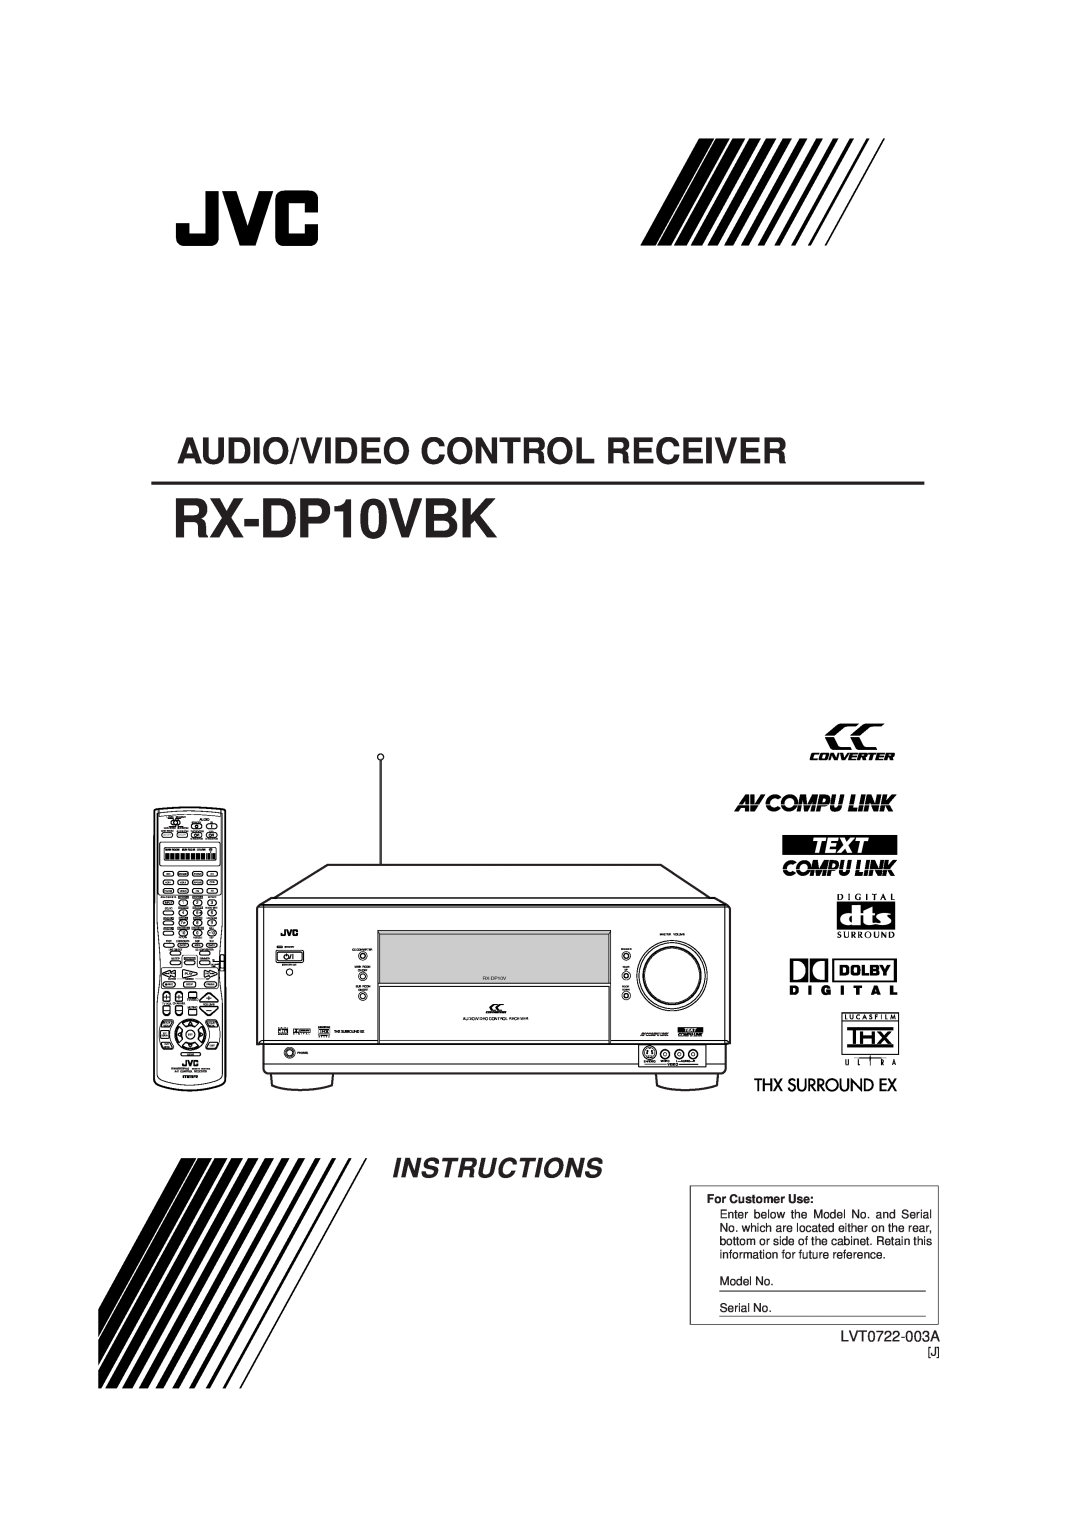 JVC RX-DP10VBK manual Audio/Video Control Receiver, Instructions, LVT0722-003A, For Customer Use 